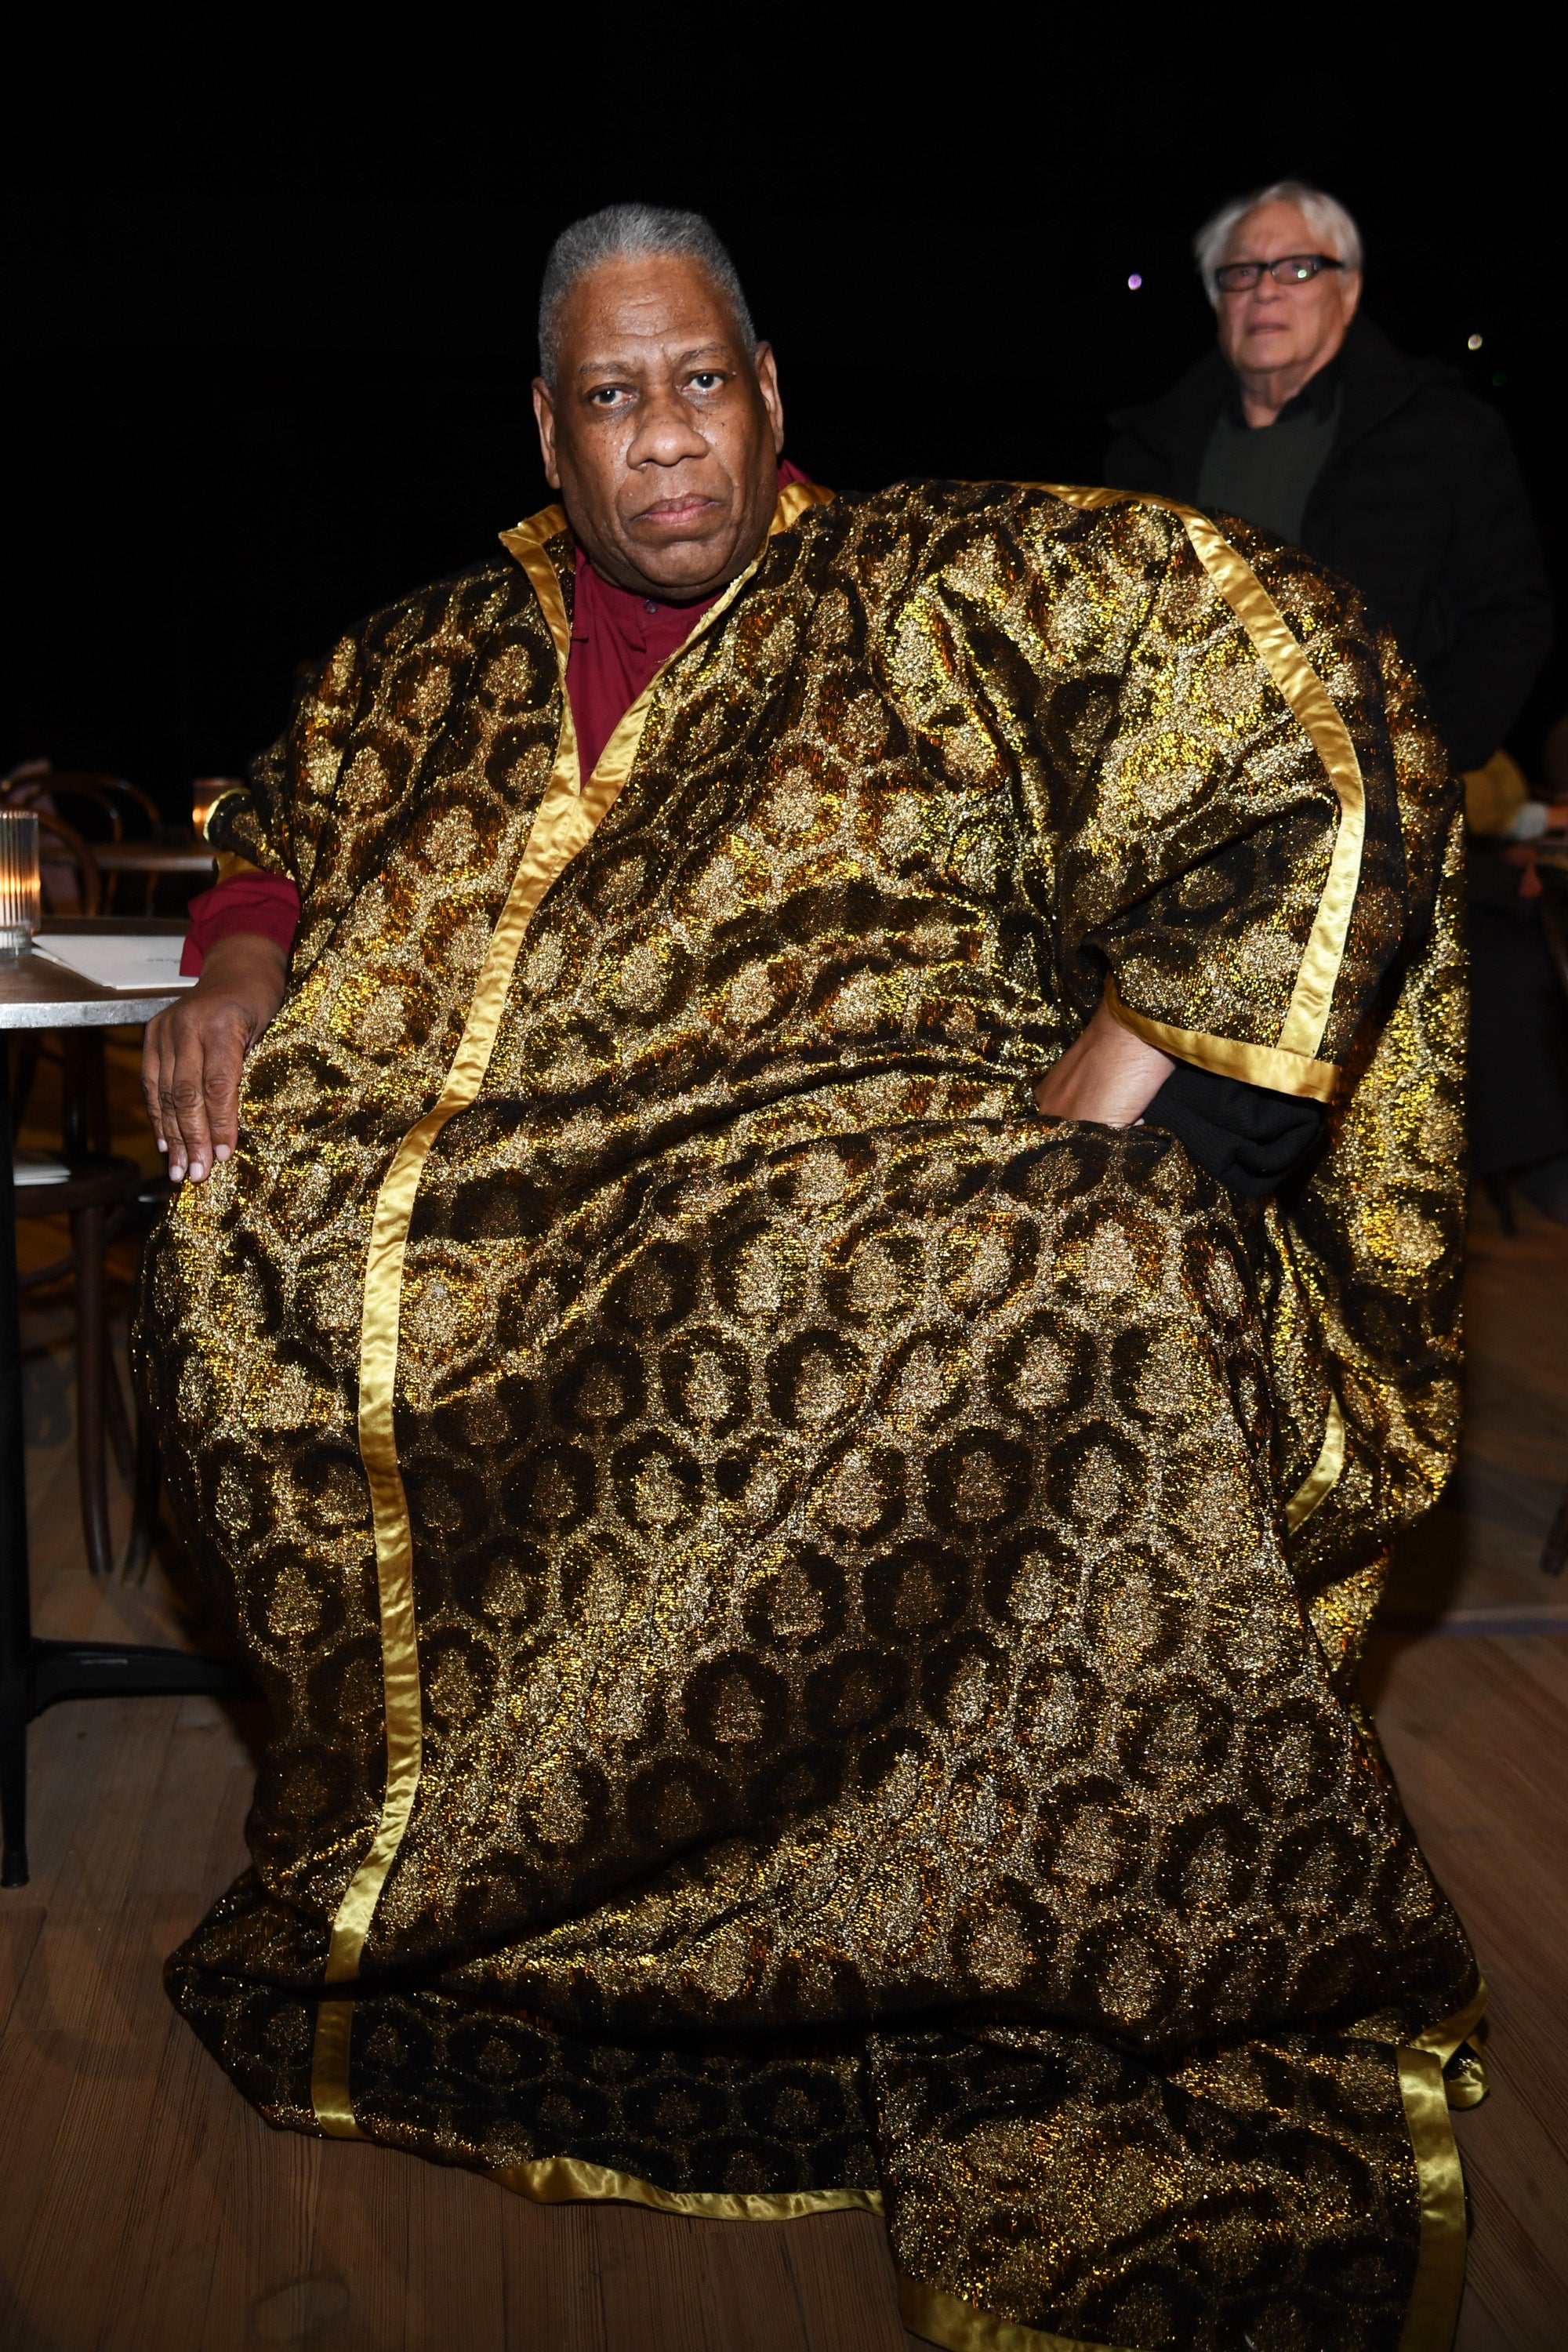 Andre Leon Talley attends the Marc Jacobs Fall 2020 runway show during New York Fashion Week on February 12, 2020